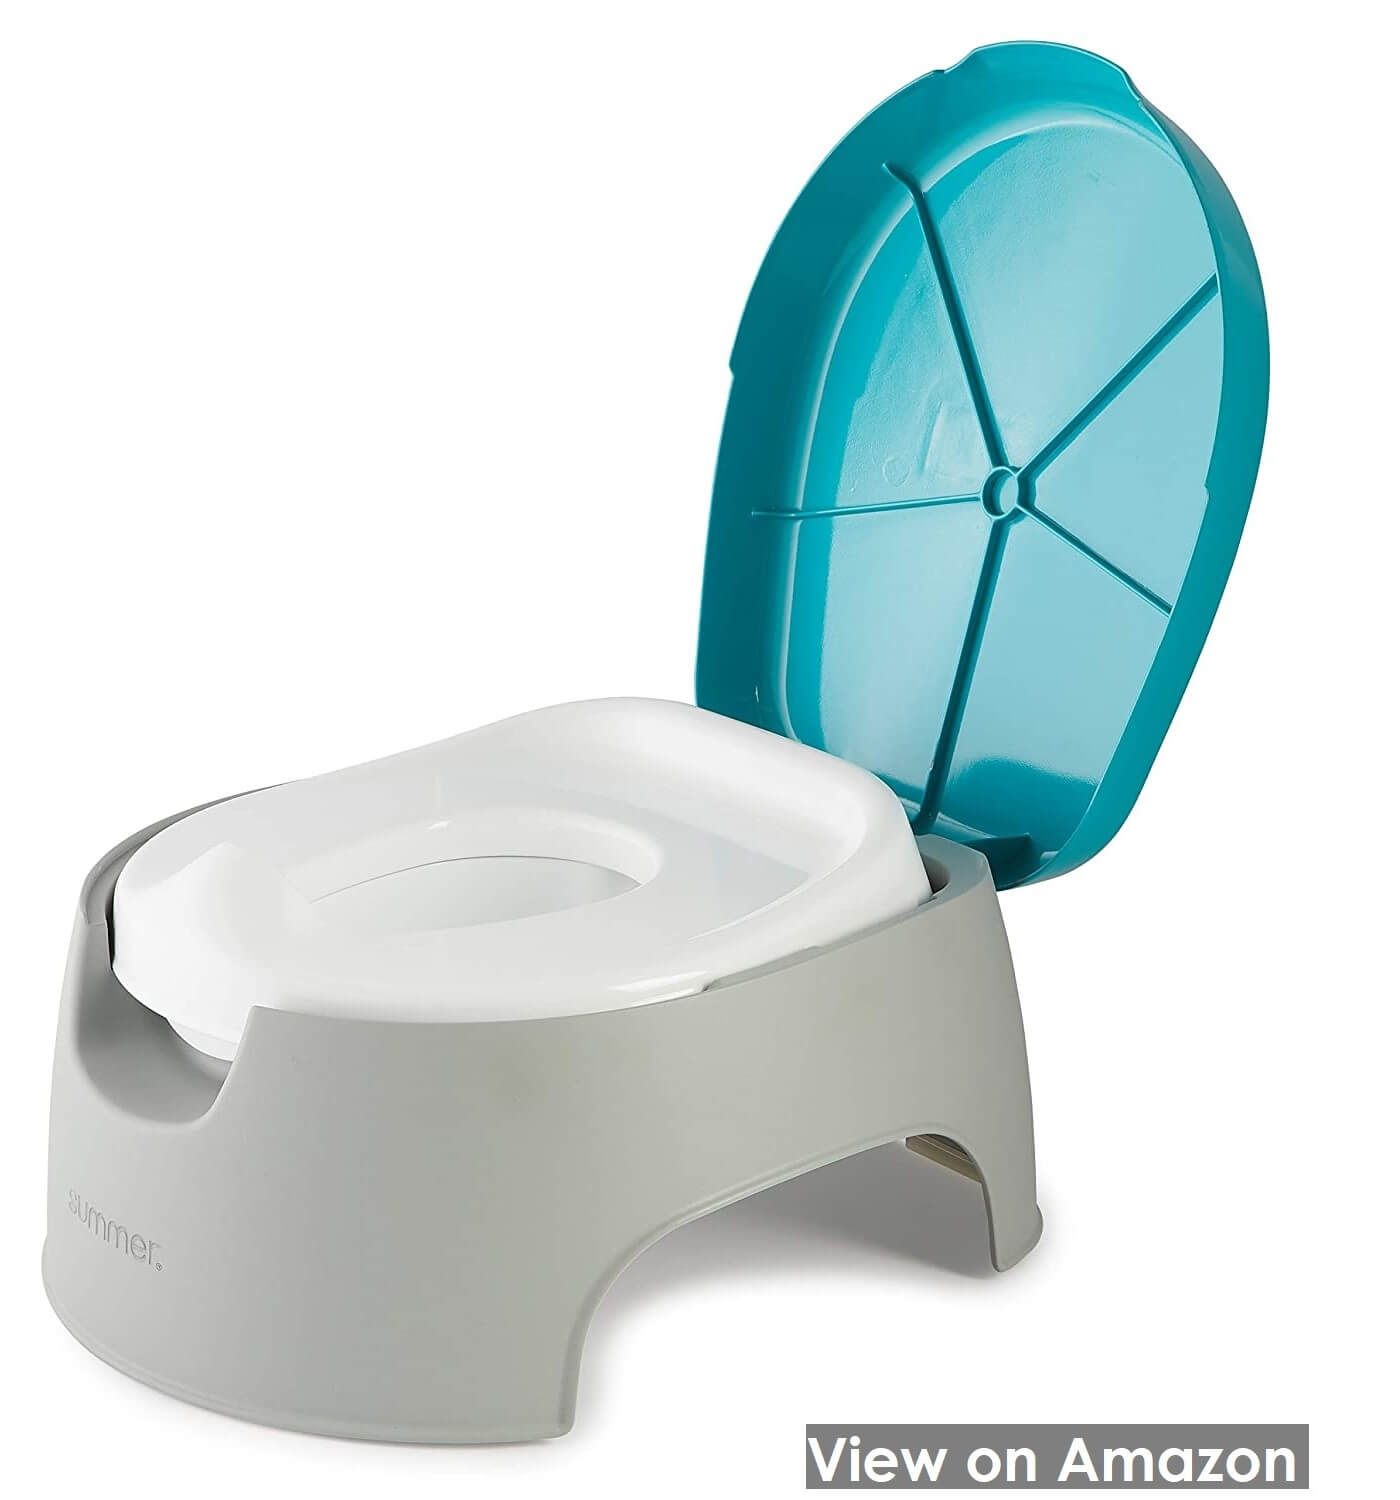 Summer 3-in-1 Train with Me Potty